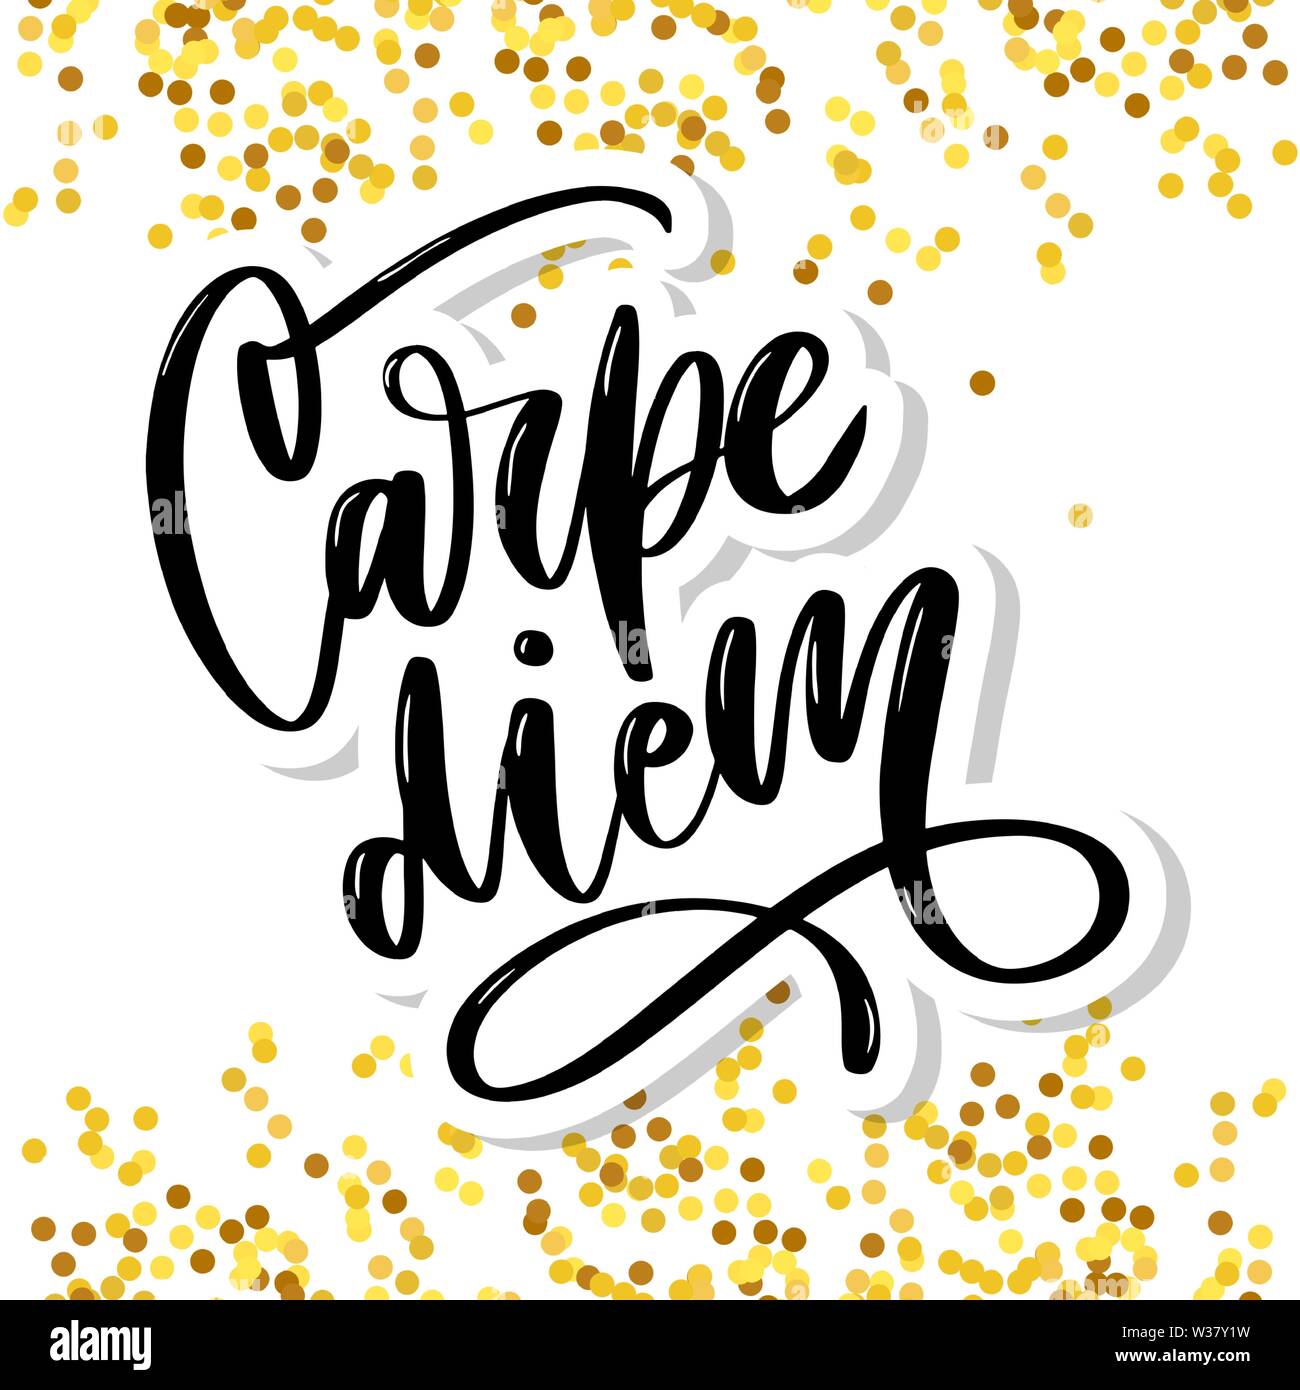 I was making a Carpe Diem phone background to use during